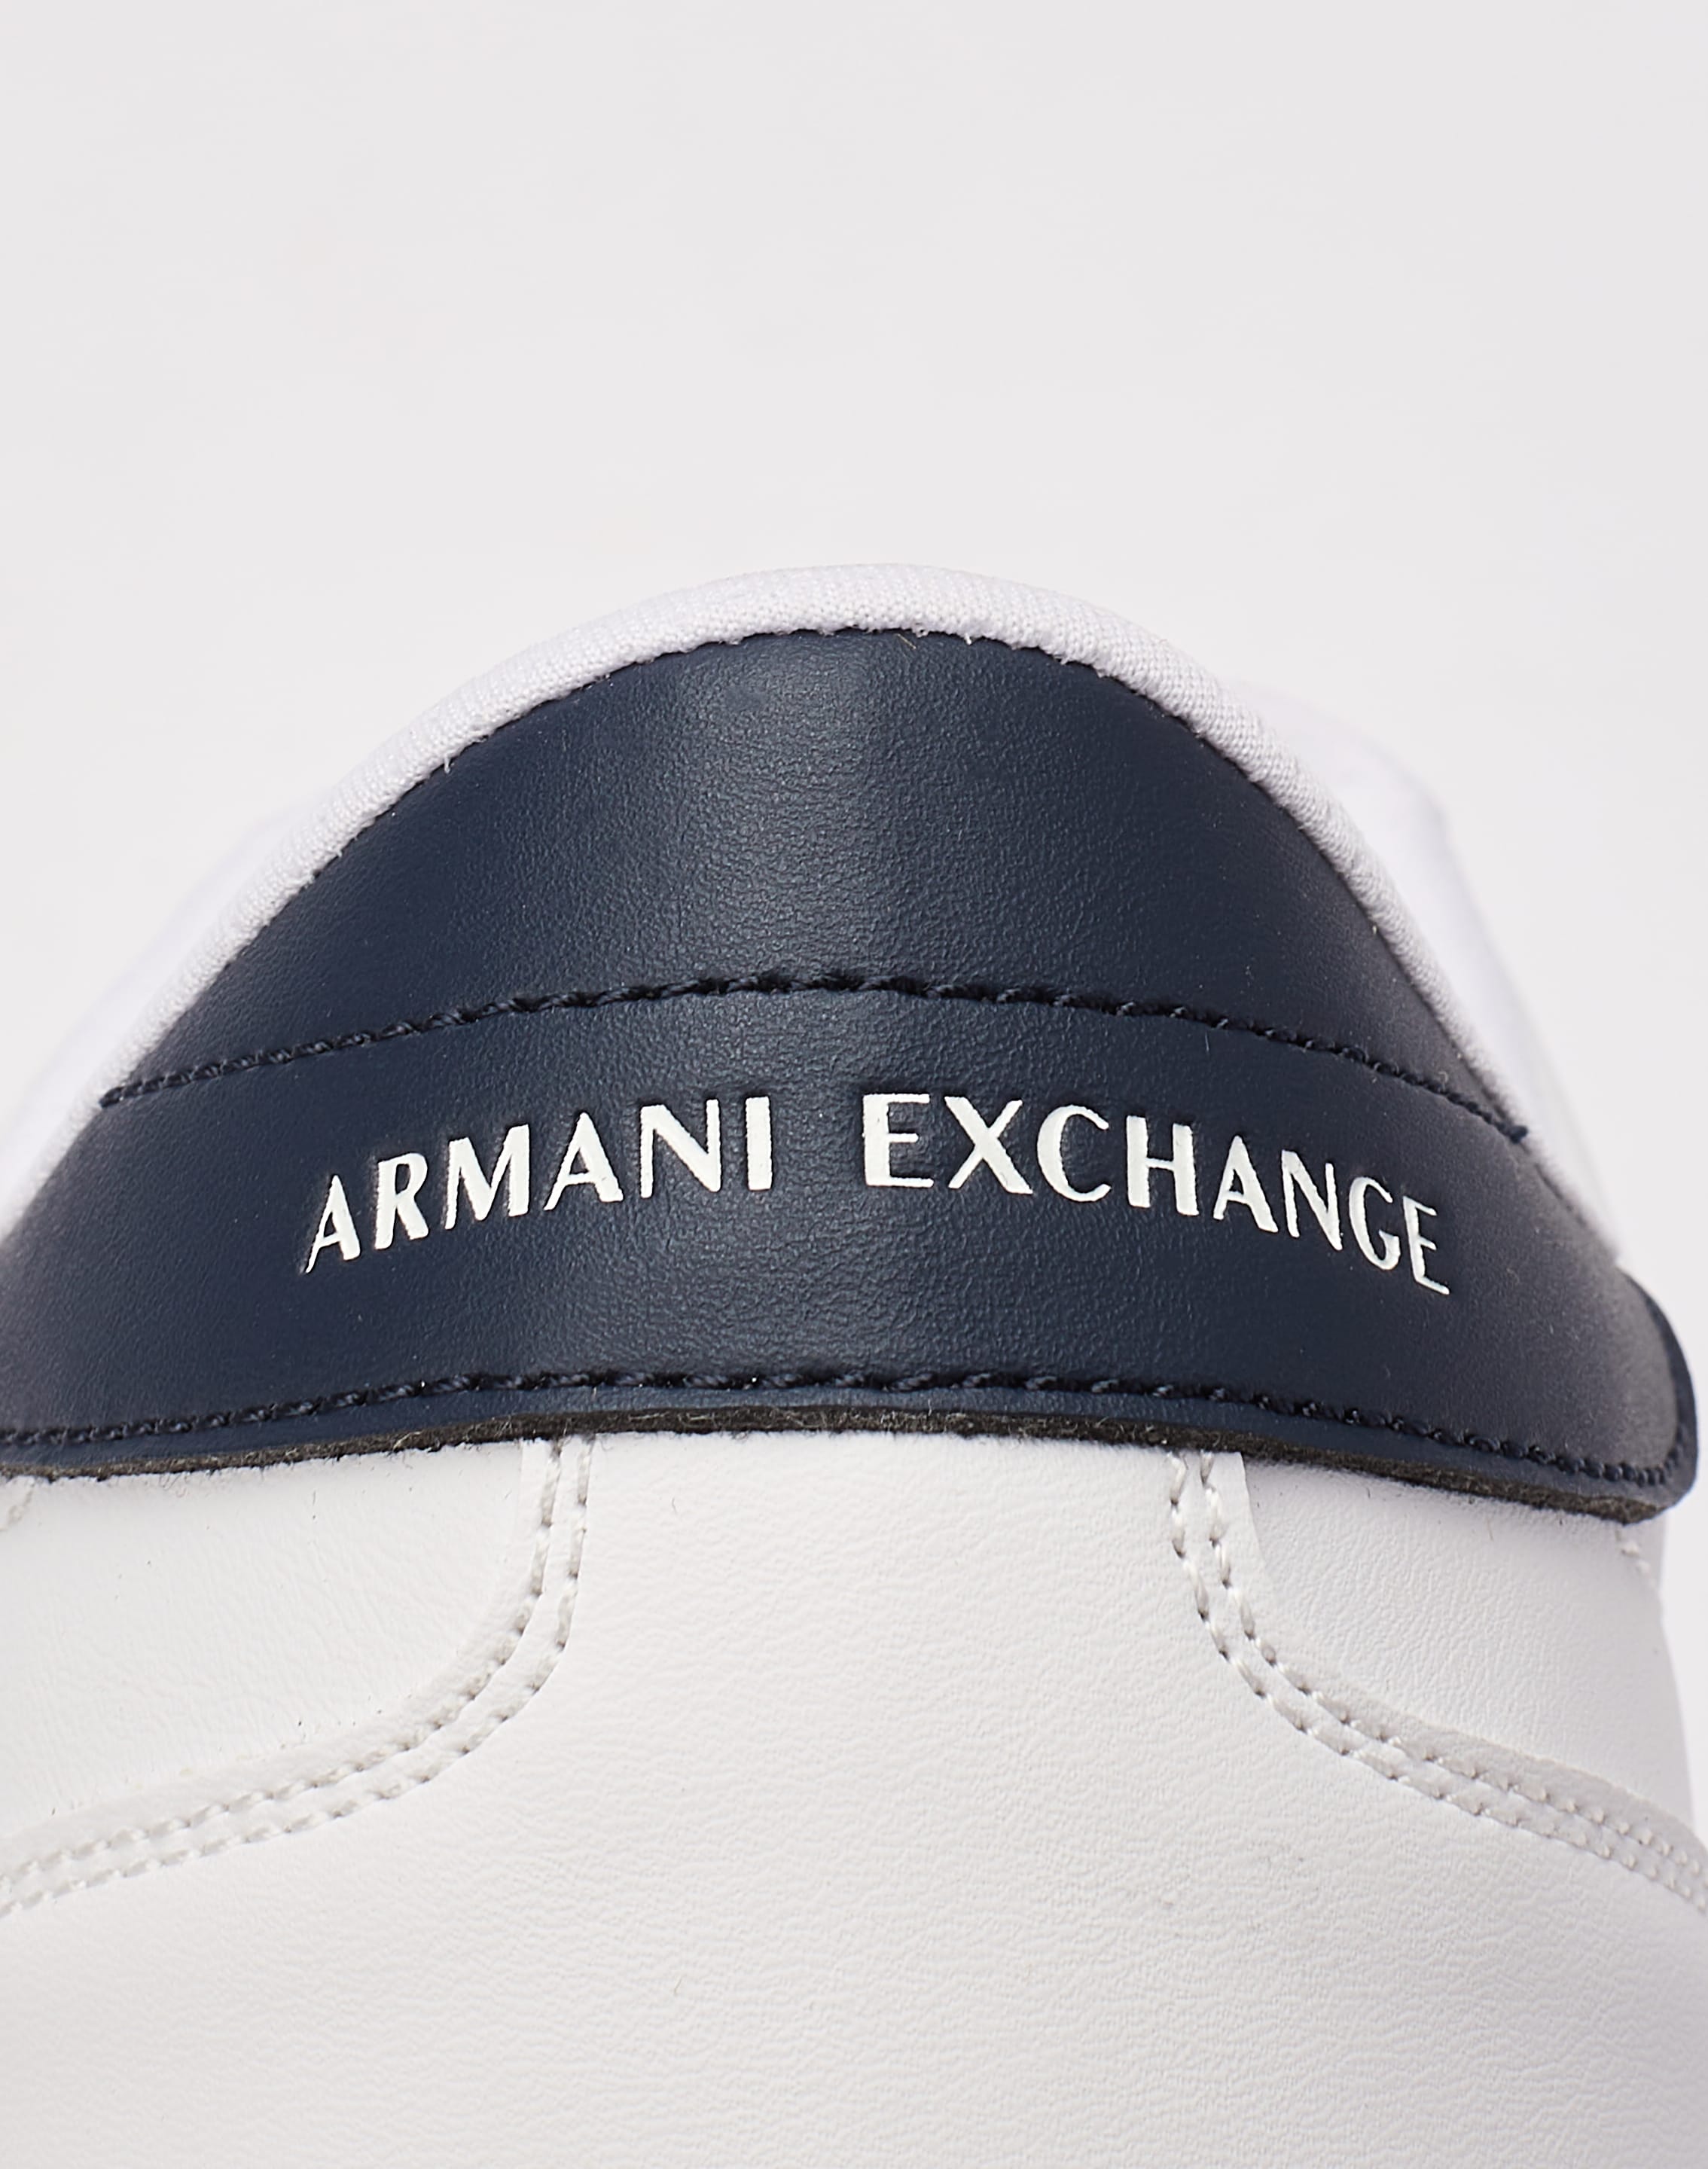 Armani Exchange Leather Sneakers – DTLR